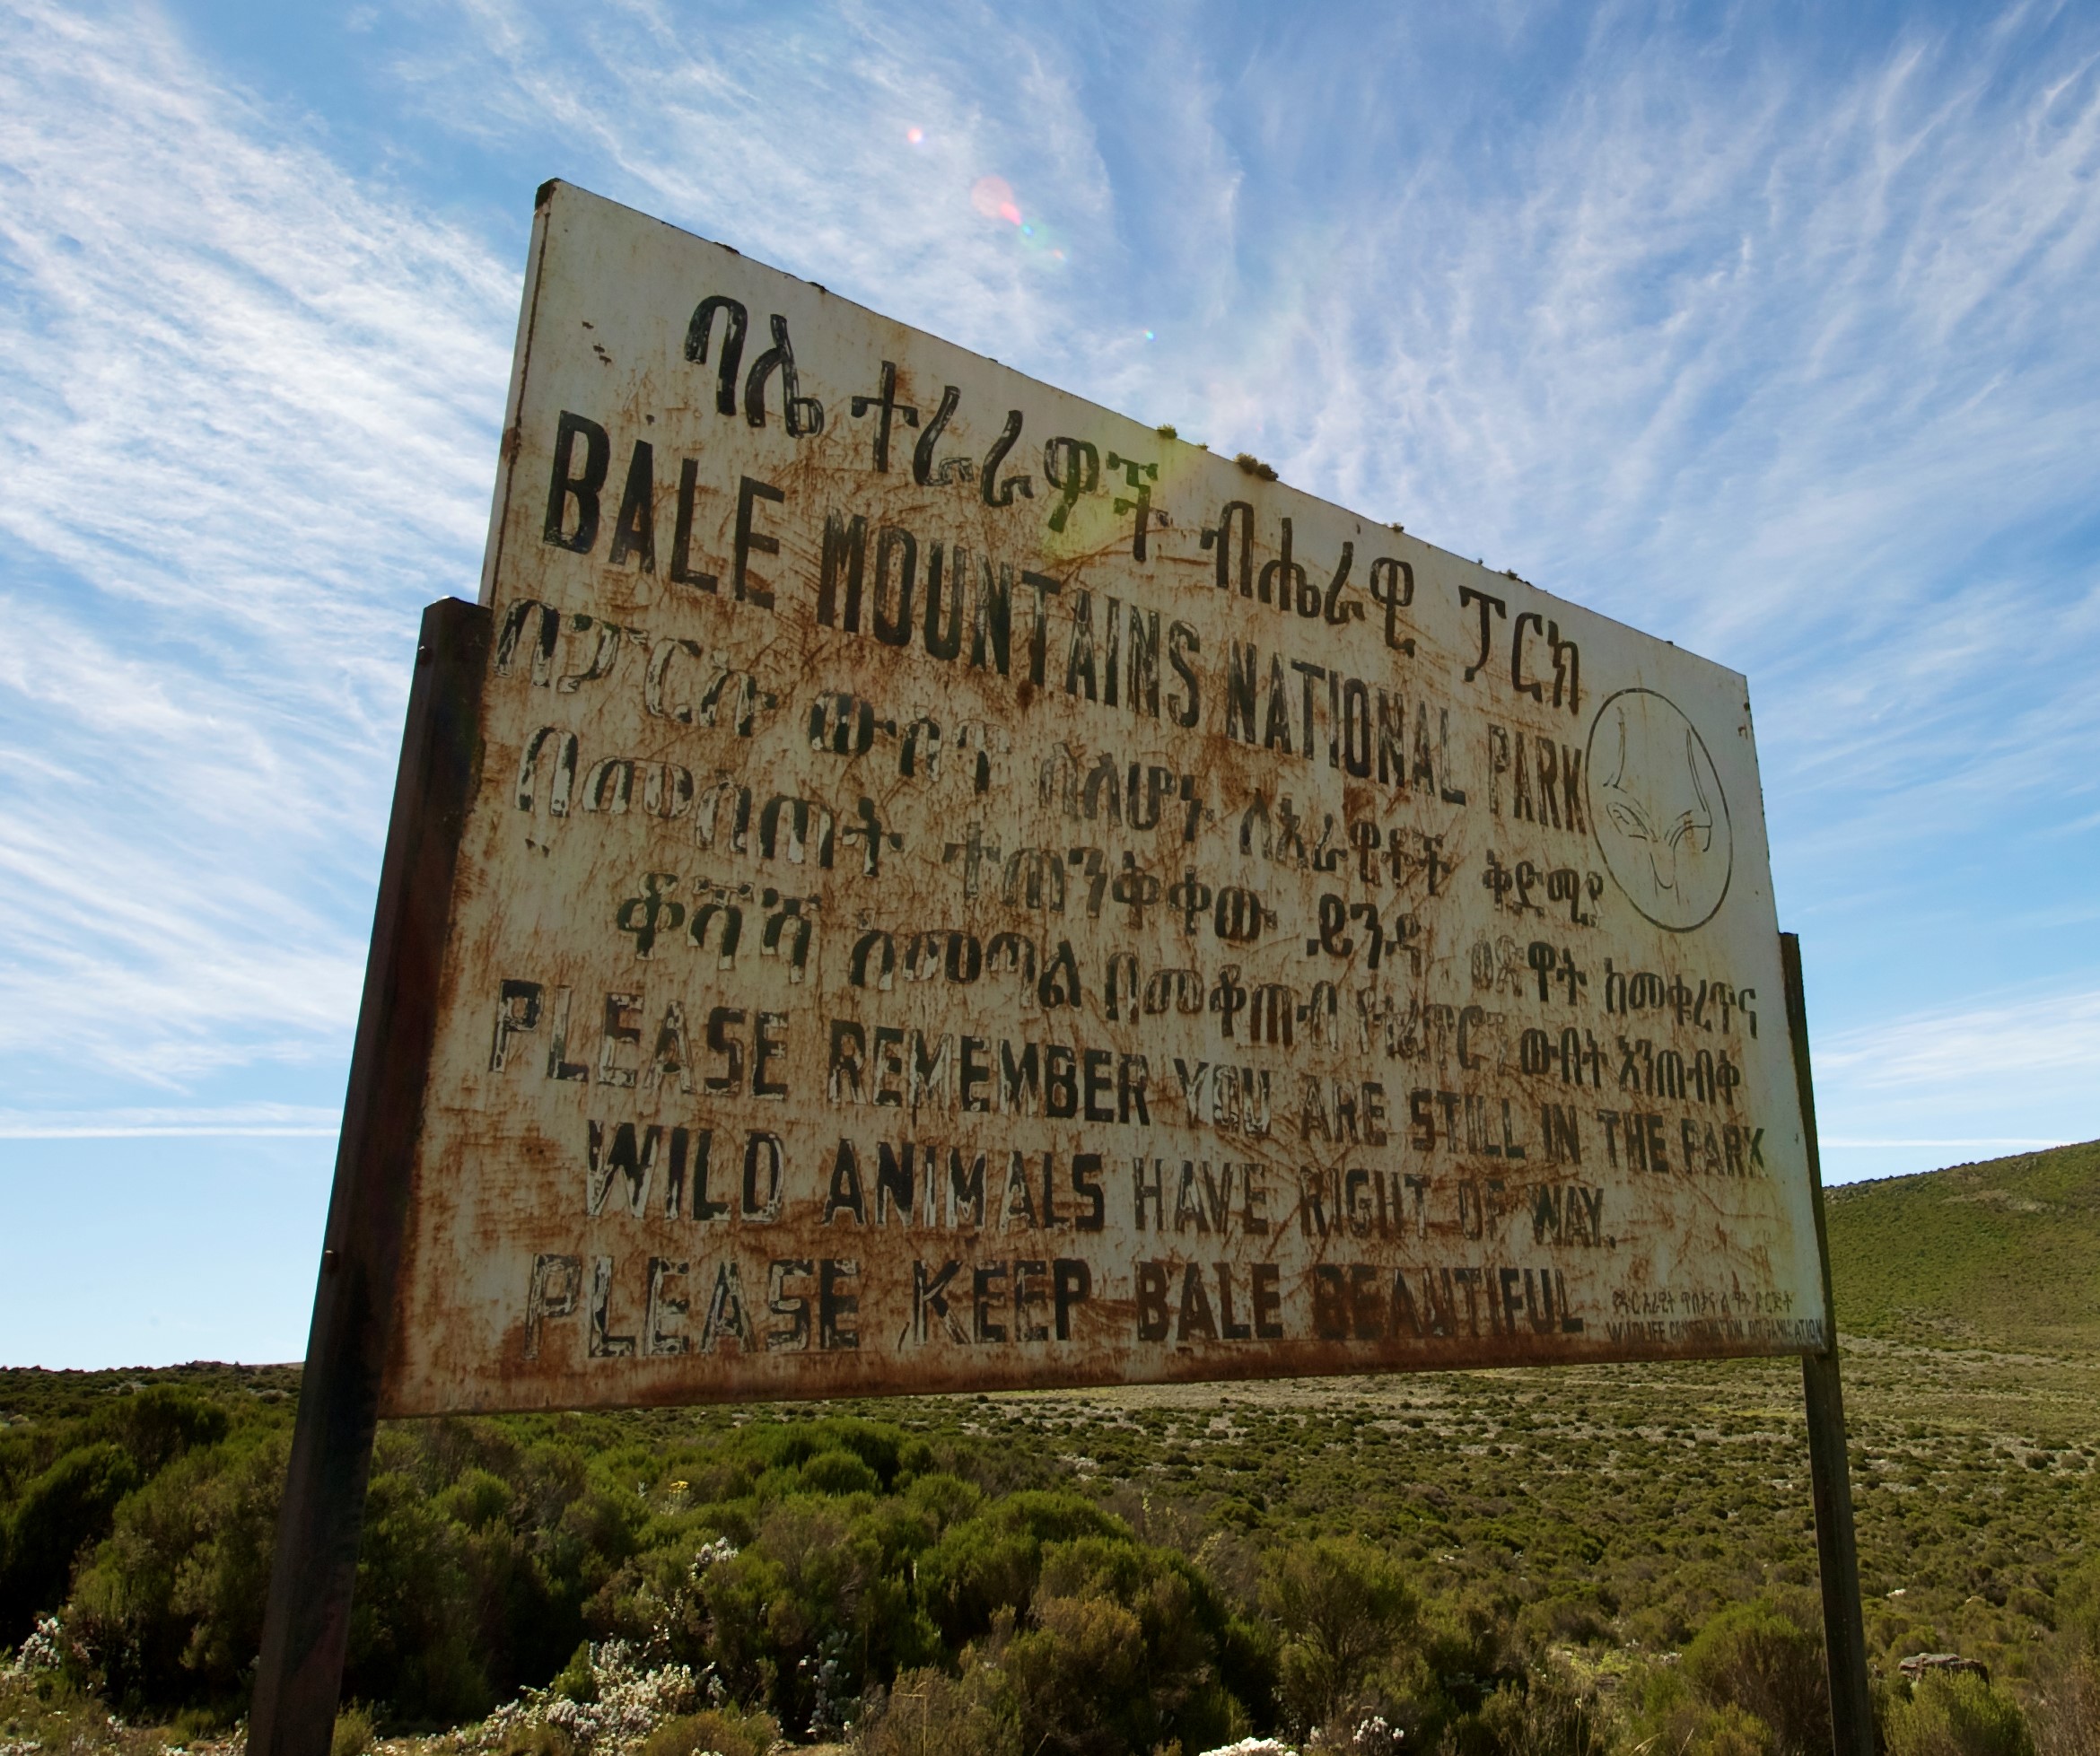 Bale Mountains National Park sign